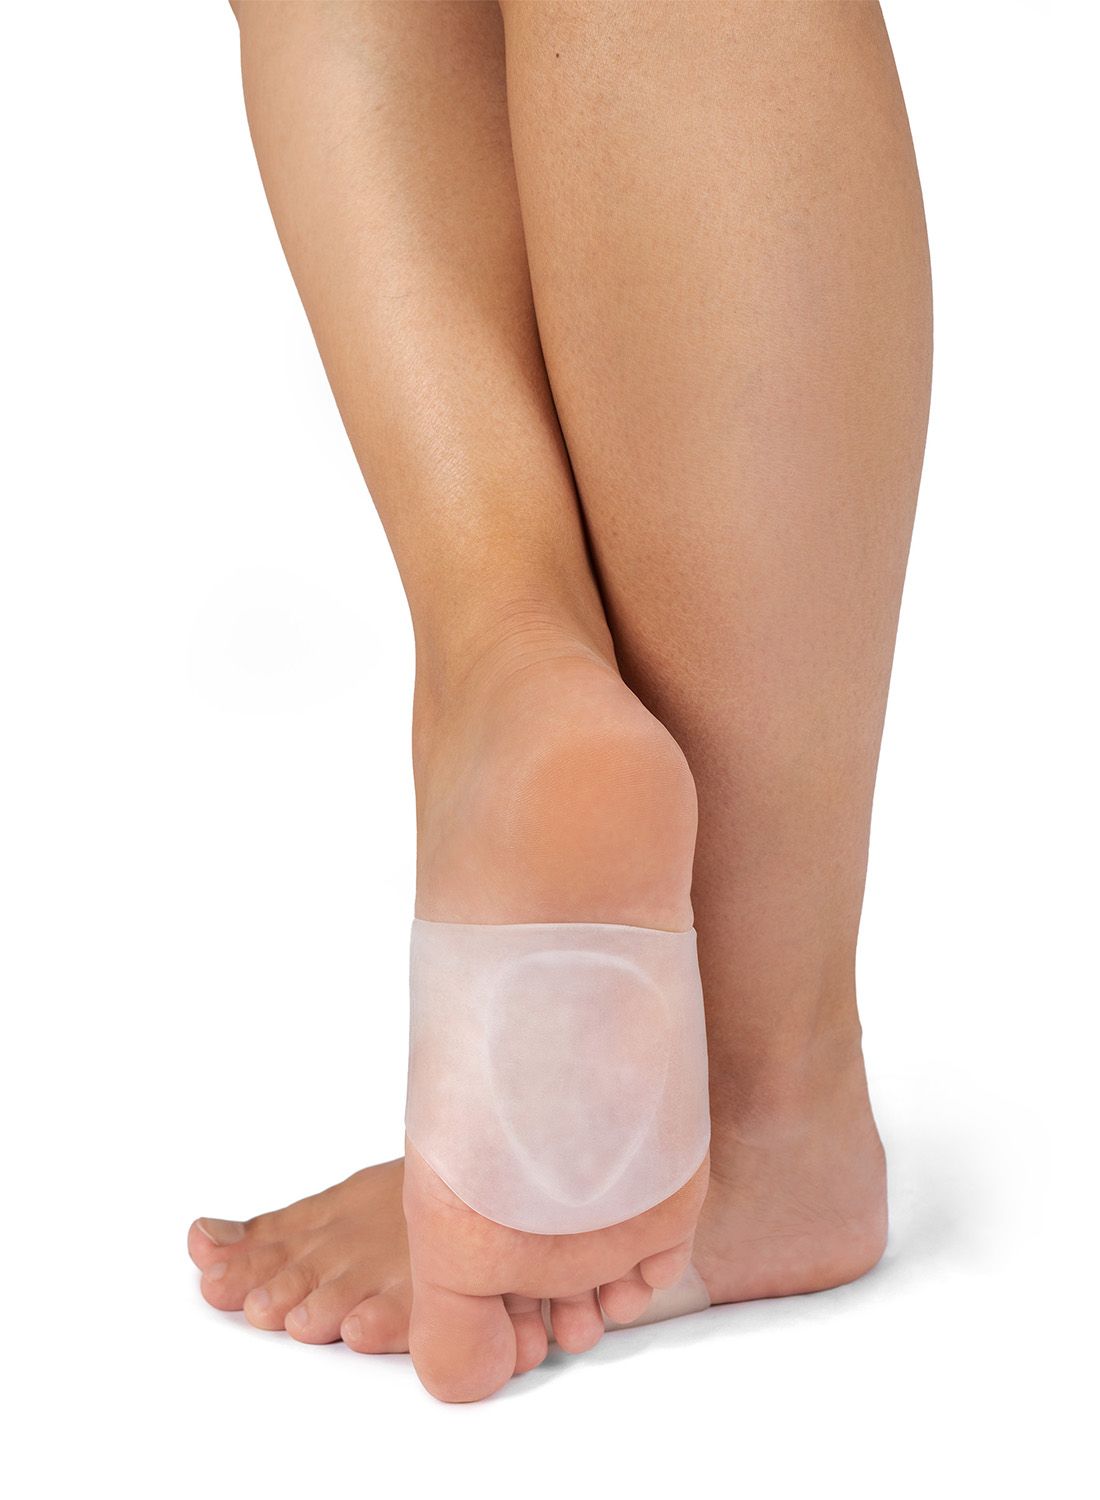 Solelution Midfoot Gel Cushion - Arch Support (Pair)